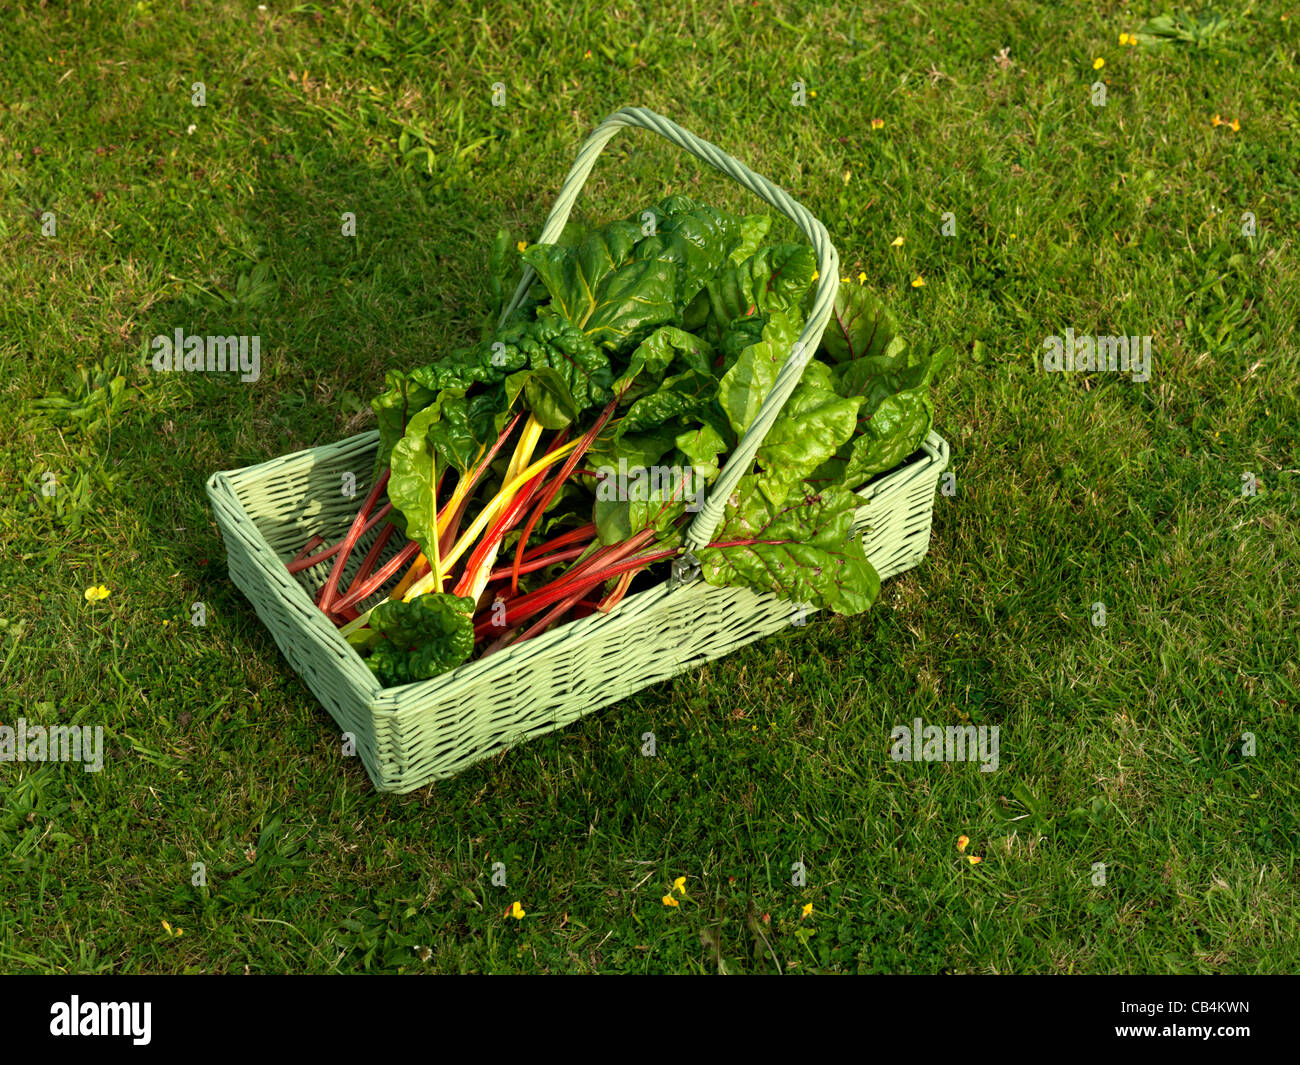 Swiss Chard Spinach Type Vegetable with Red and Yellow Stalks Beta Cicla From The Beet Family In A Trug Stock Photo